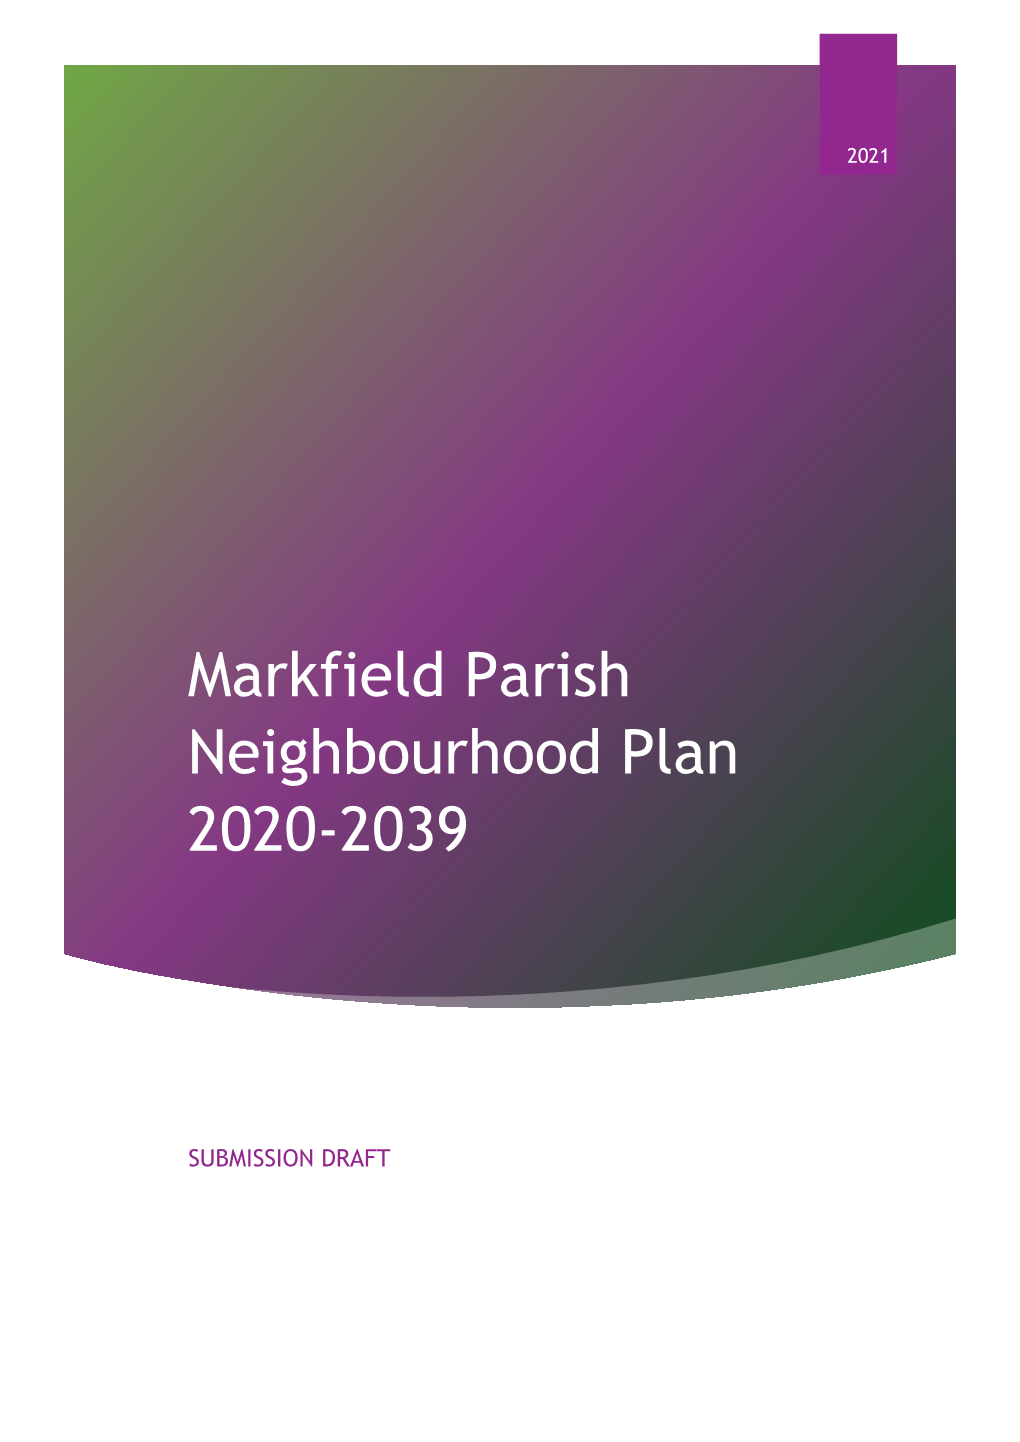 Markfield Parish Neighbourhood Plan Steering Group on Behalf of Markfield Parish Council Which Is the Qualifying Body